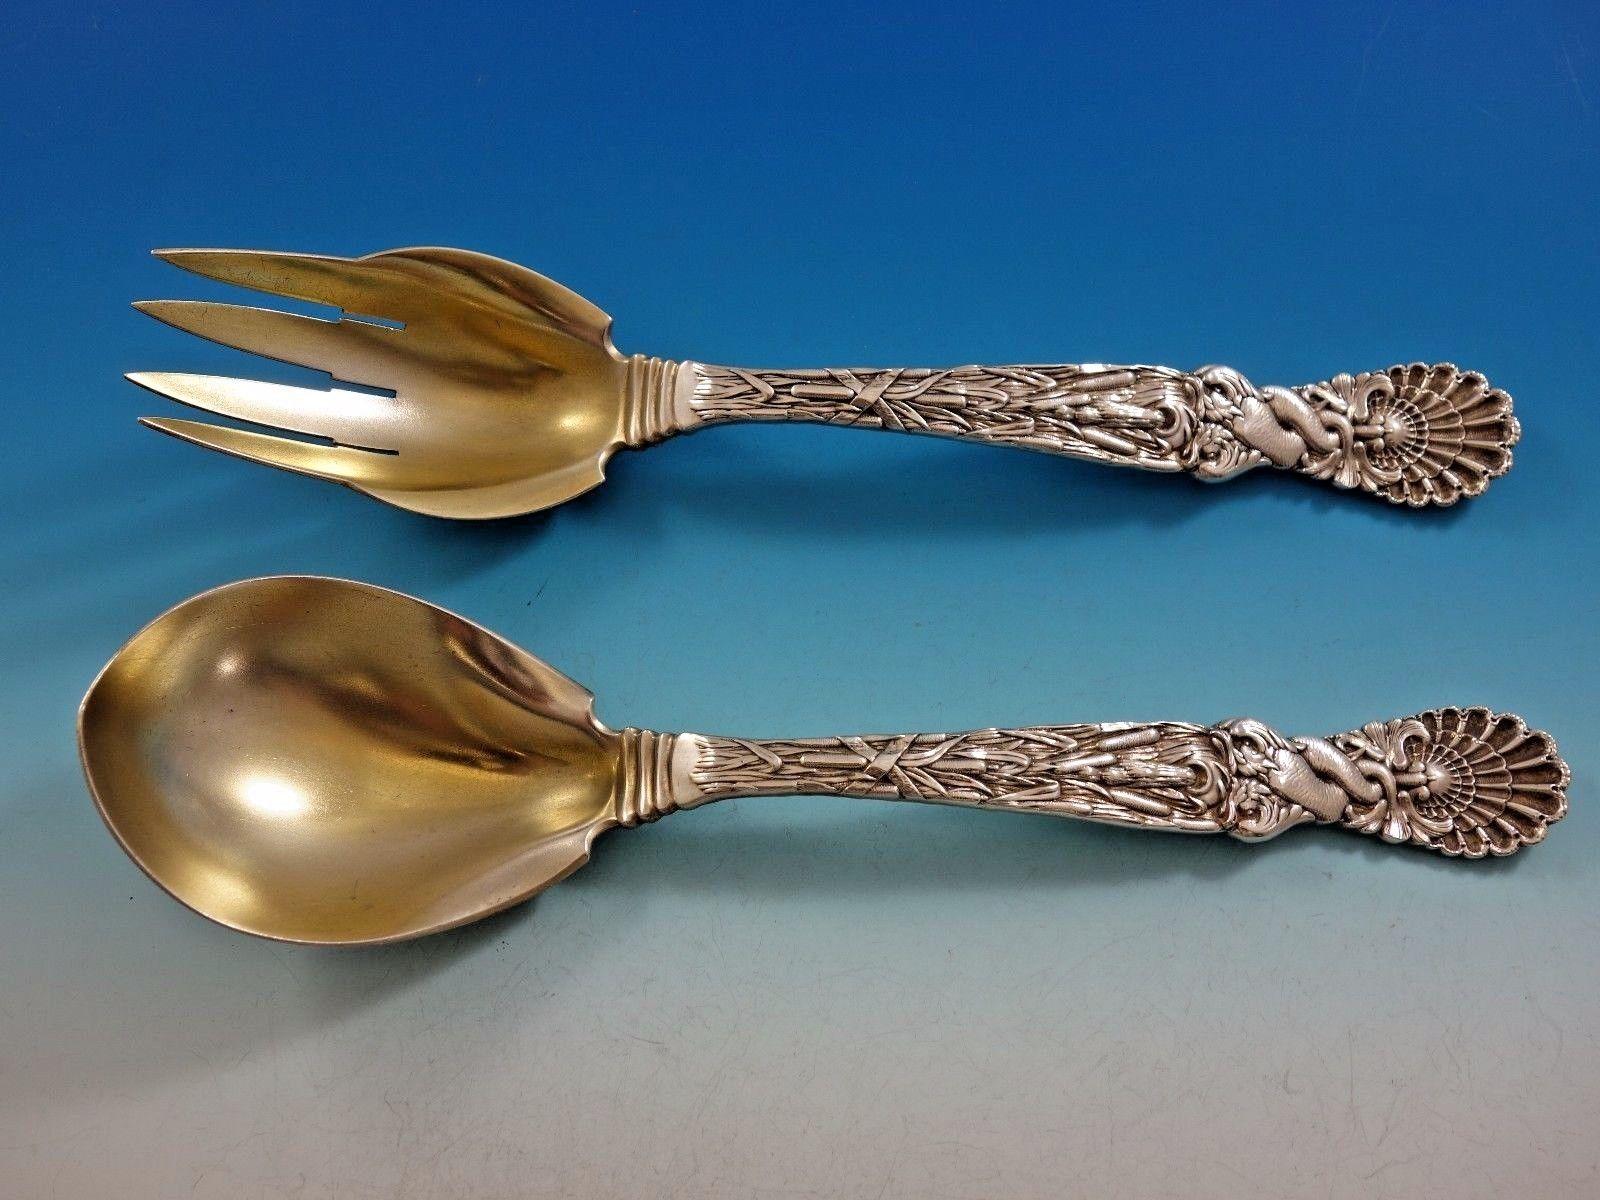 Outstanding sterling silver salad serving set three-piece in the pattern Dolphin by Tiffany and Co. 
This rare set includes:

1- Salad bowl: Featuring stylized dolphins and seashells. The piece is footed, it's marked with #7096/6137, and has a